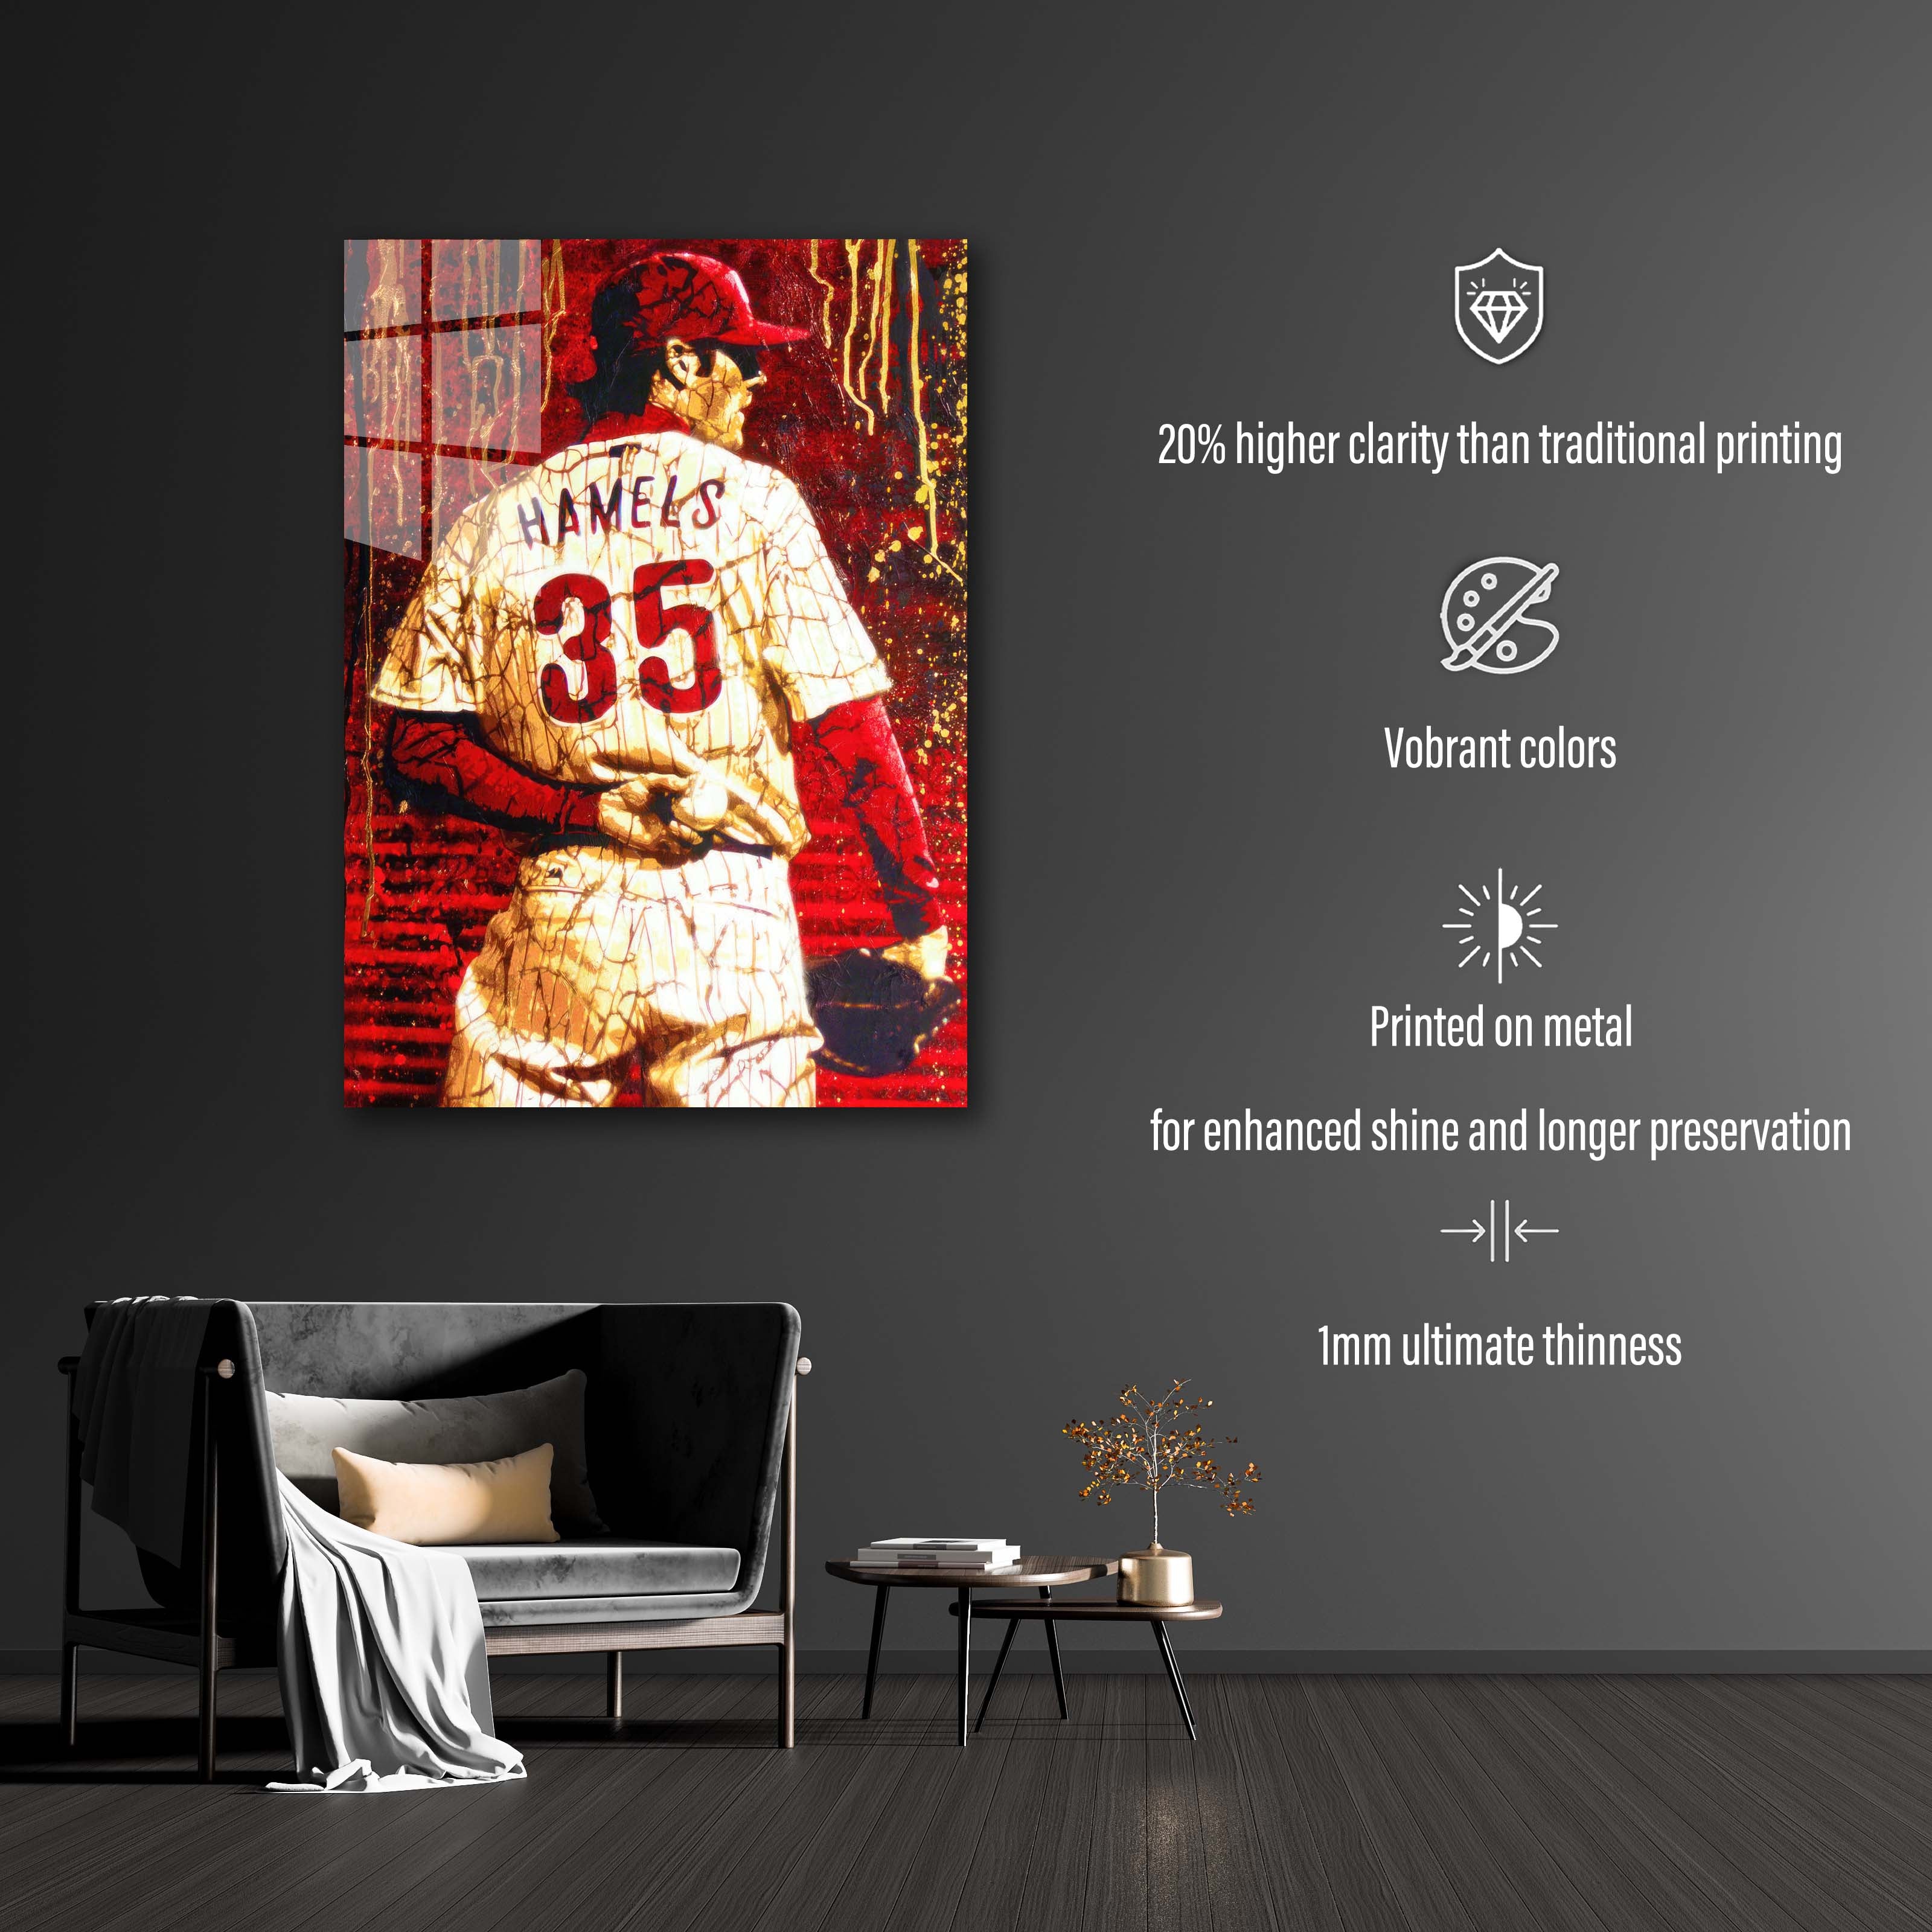 Hamels - The Execut-designed by @Vinahayum